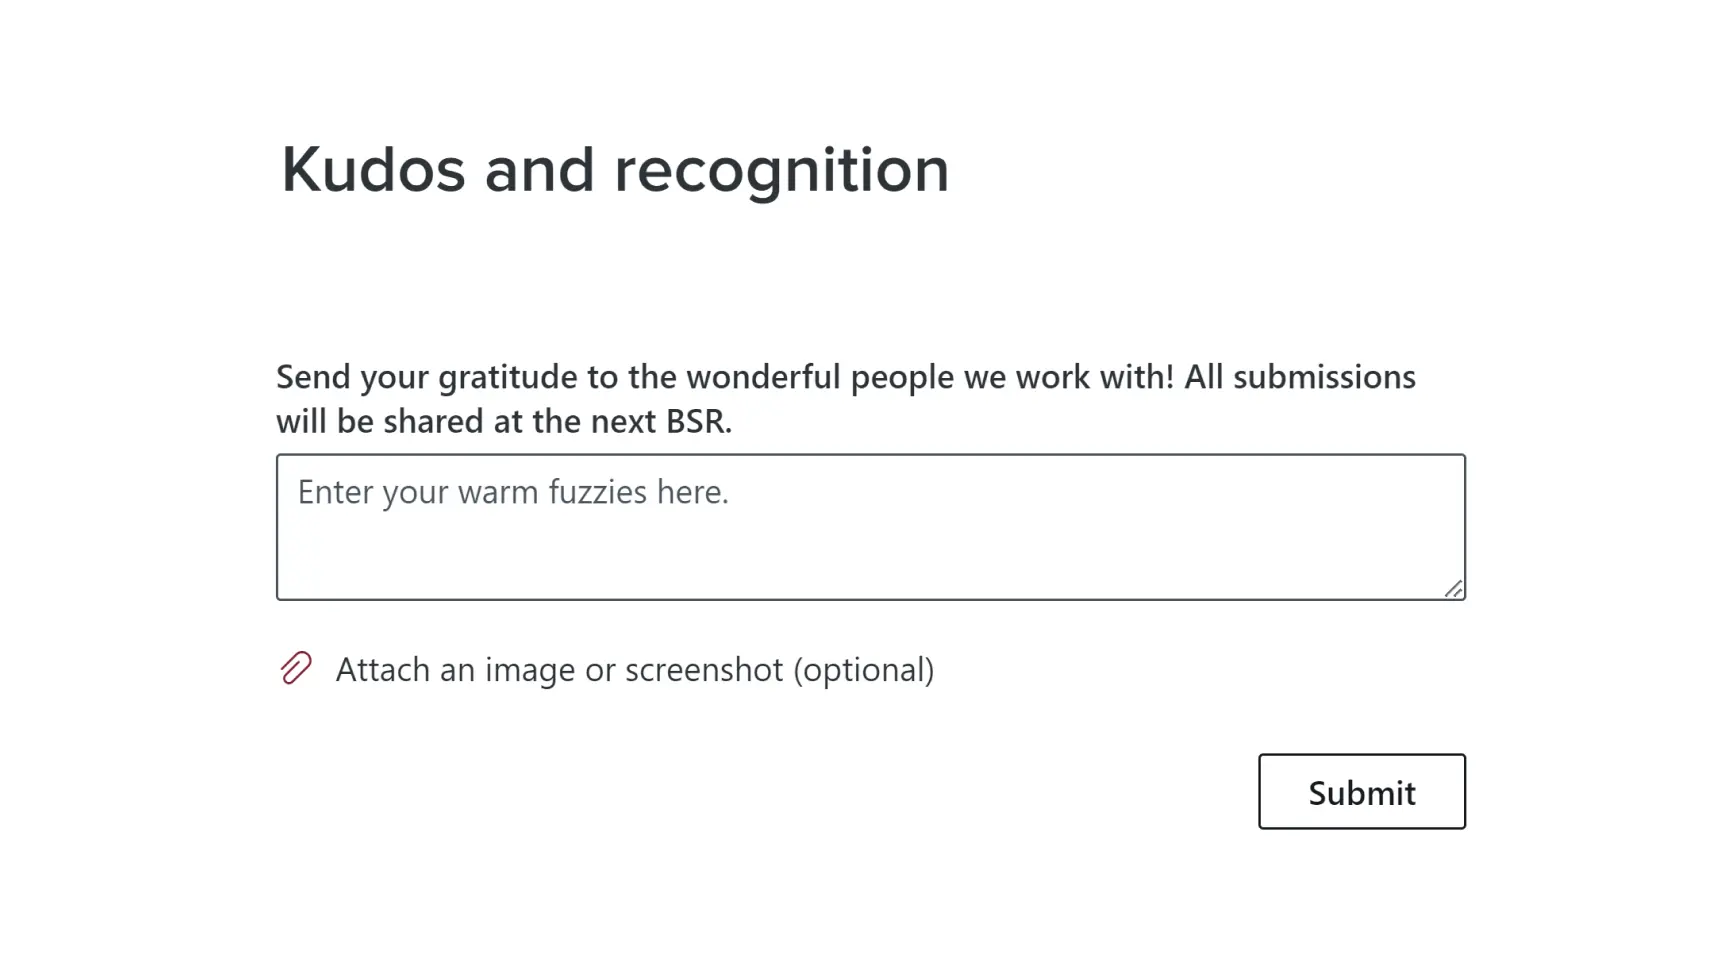 Image of the Microsoft form that Habanero employees use to input kudos and recognition.